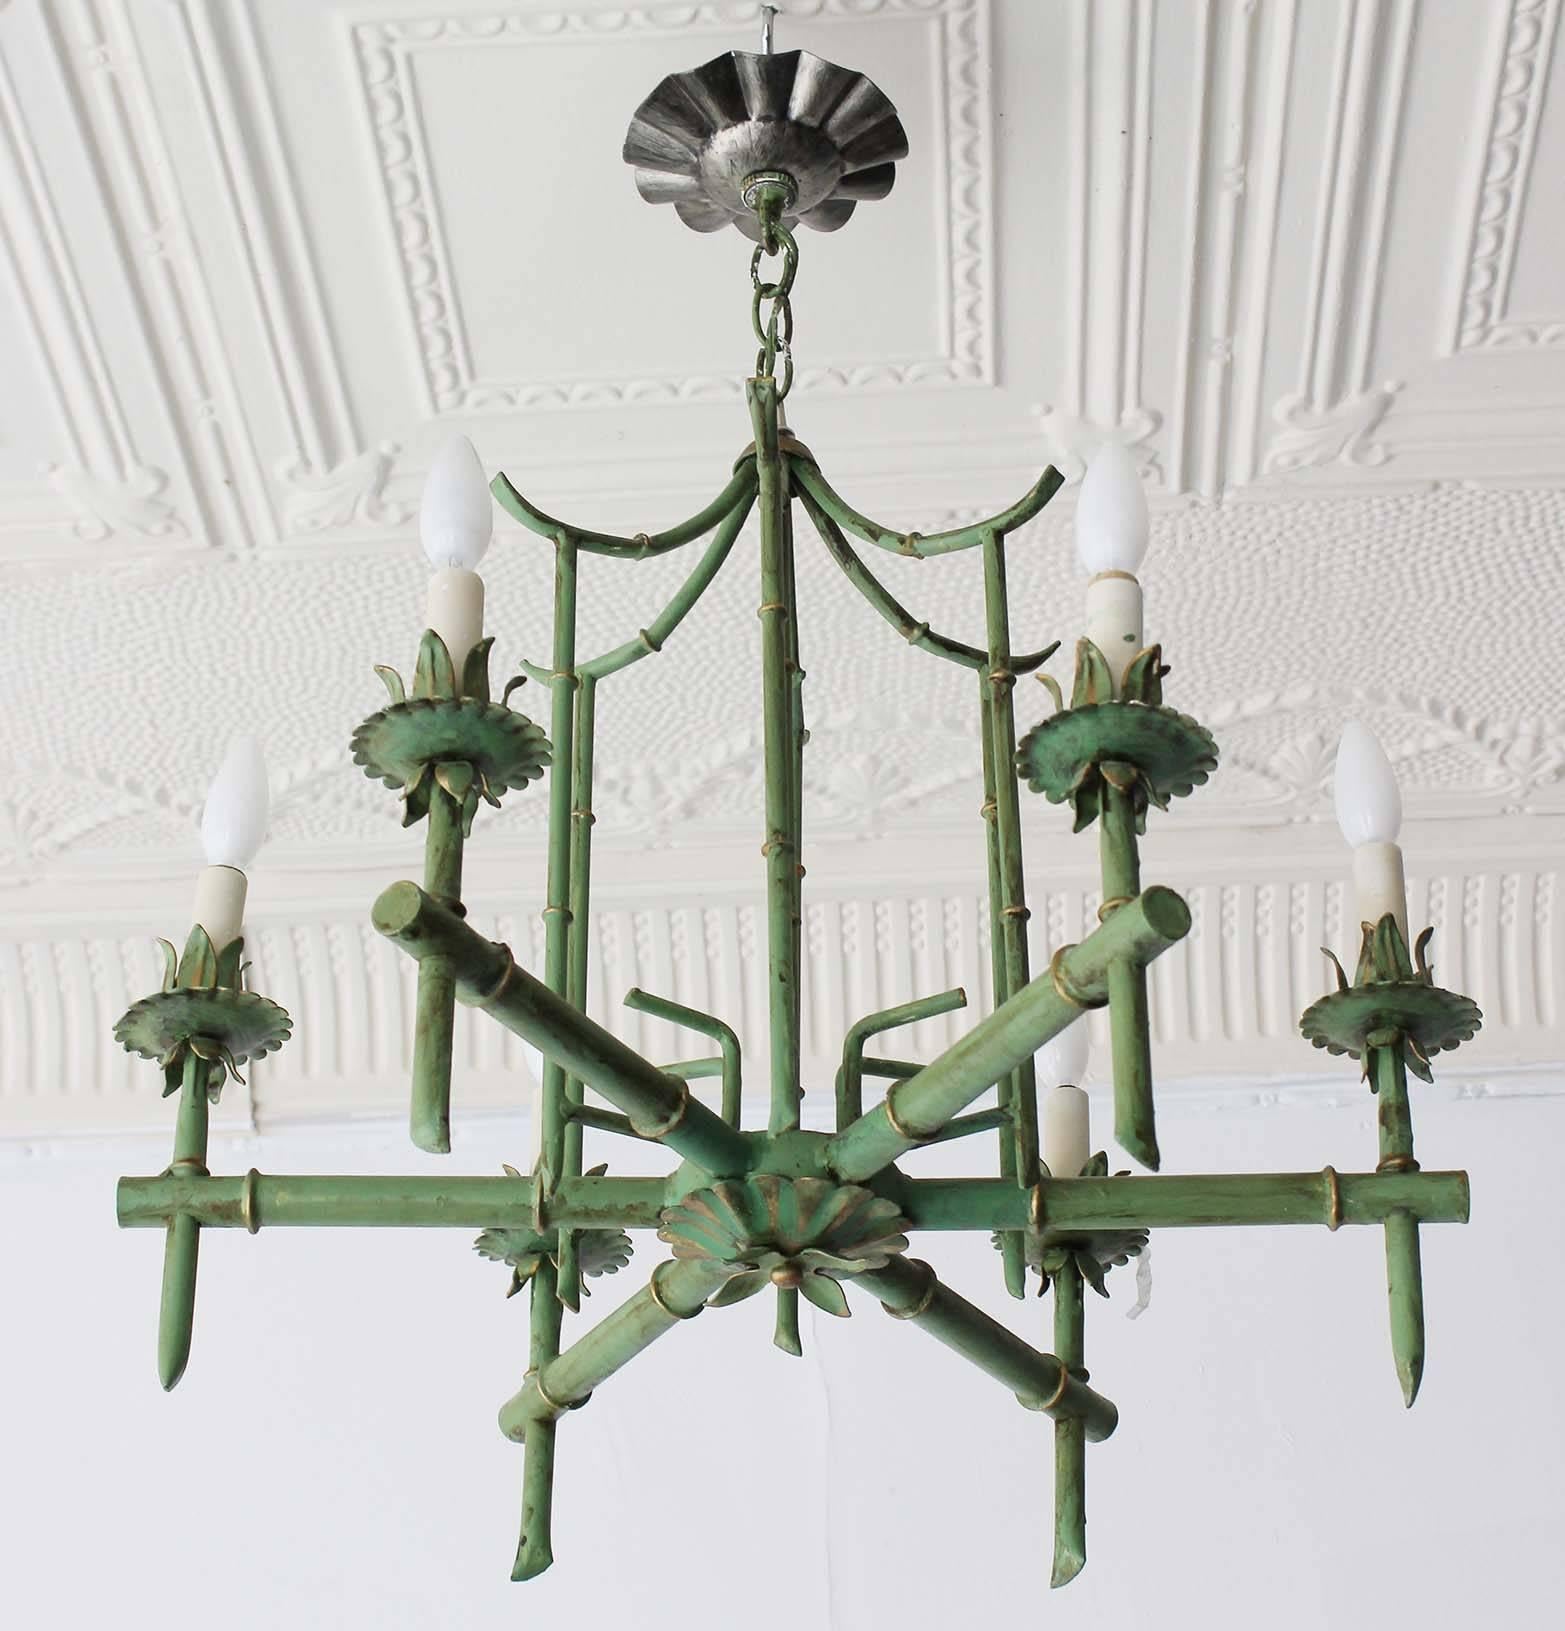 A charming Italian midcentury chinoiserie faux bamboo chandelier, vintage green. 

Measure: Fixture is 21 inches high.